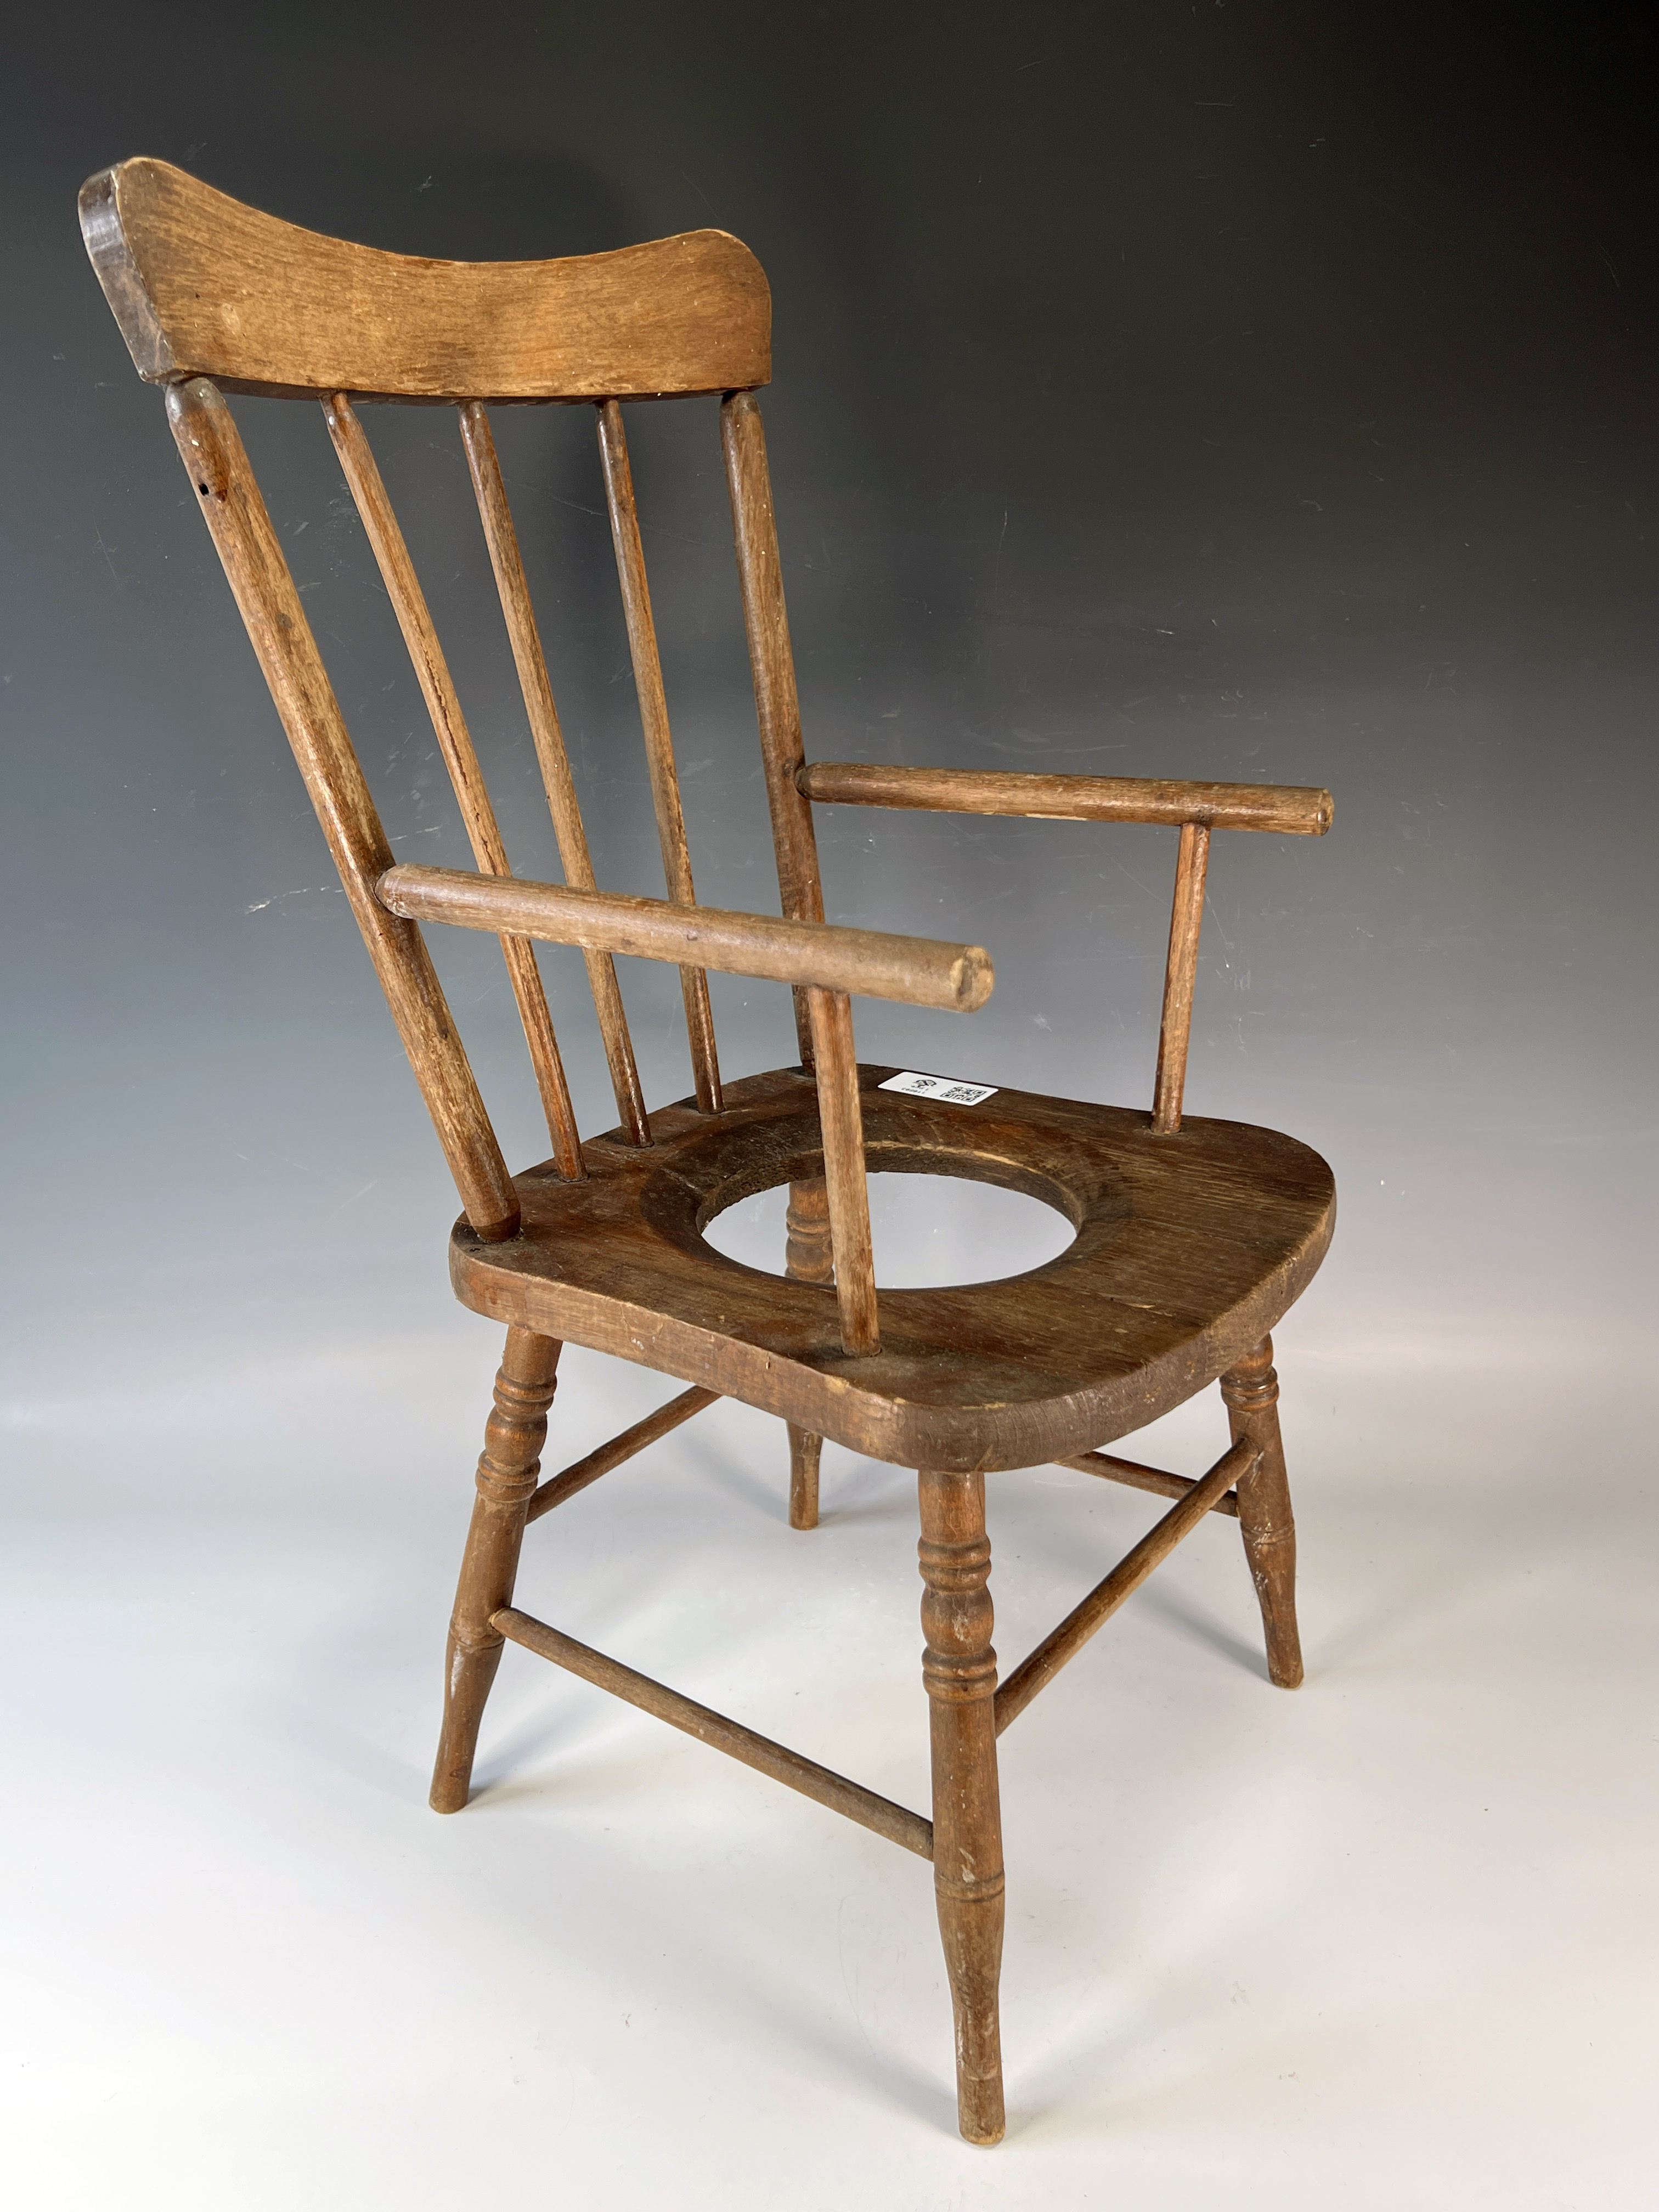 Vintage Wooden Potty Chair image 1